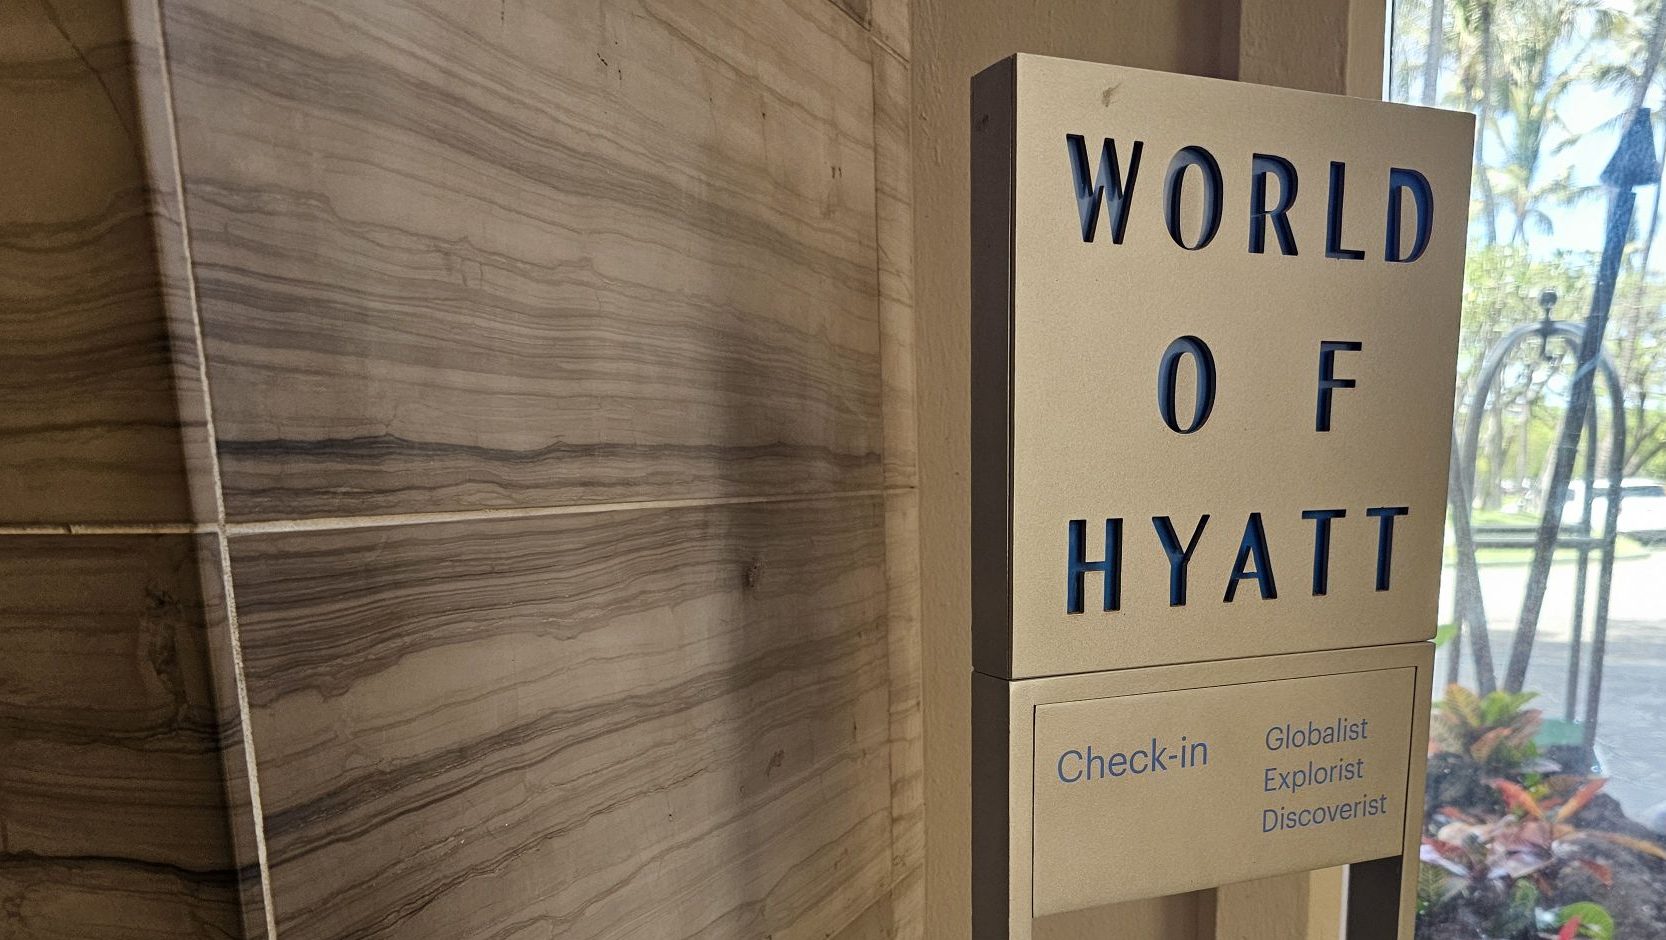 Explore Asia with New World of Hyatt Member Sale, Save Up to 20%